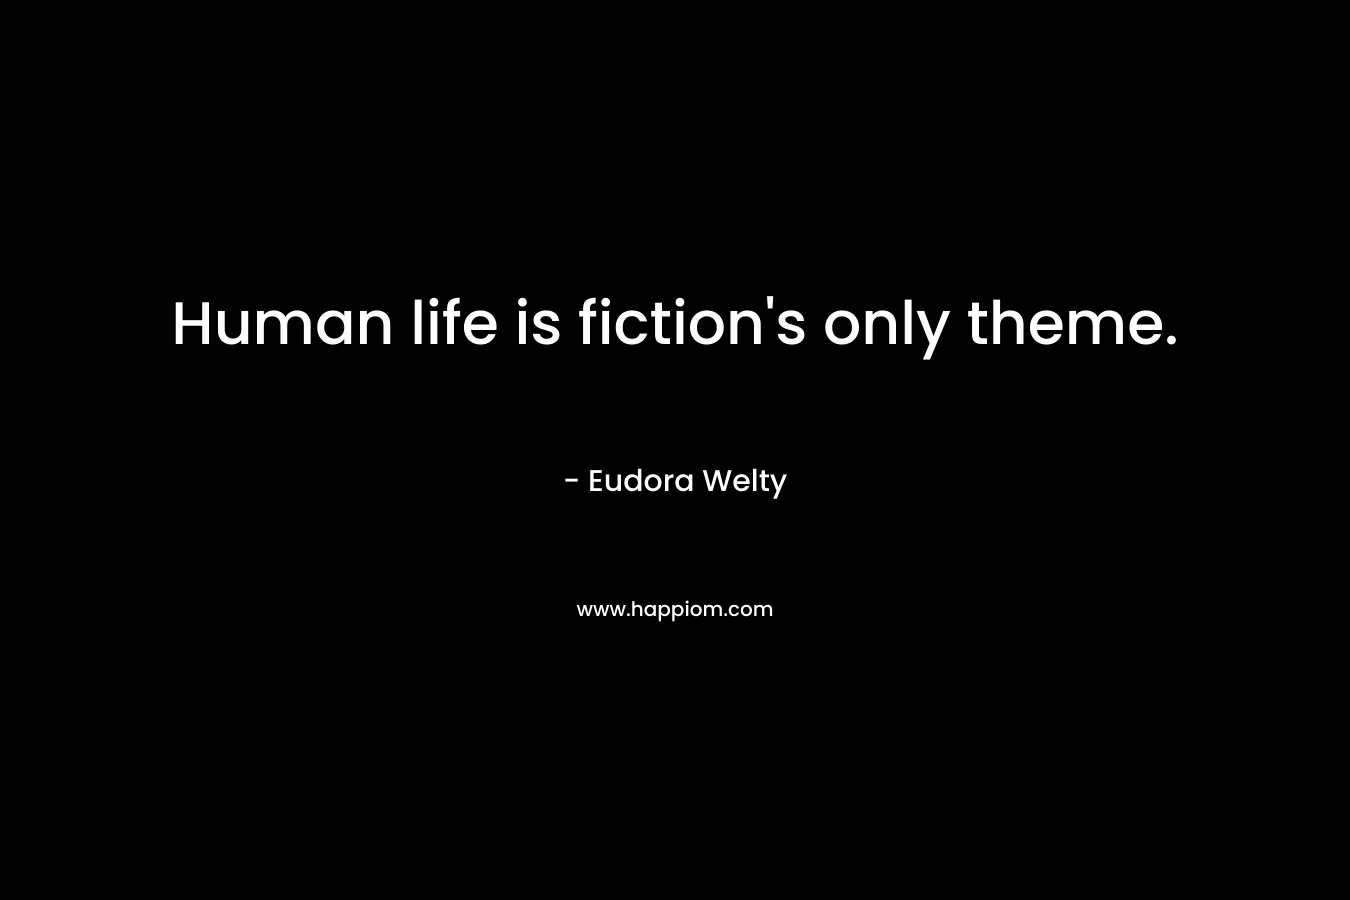 Human life is fiction’s only theme. – Eudora Welty